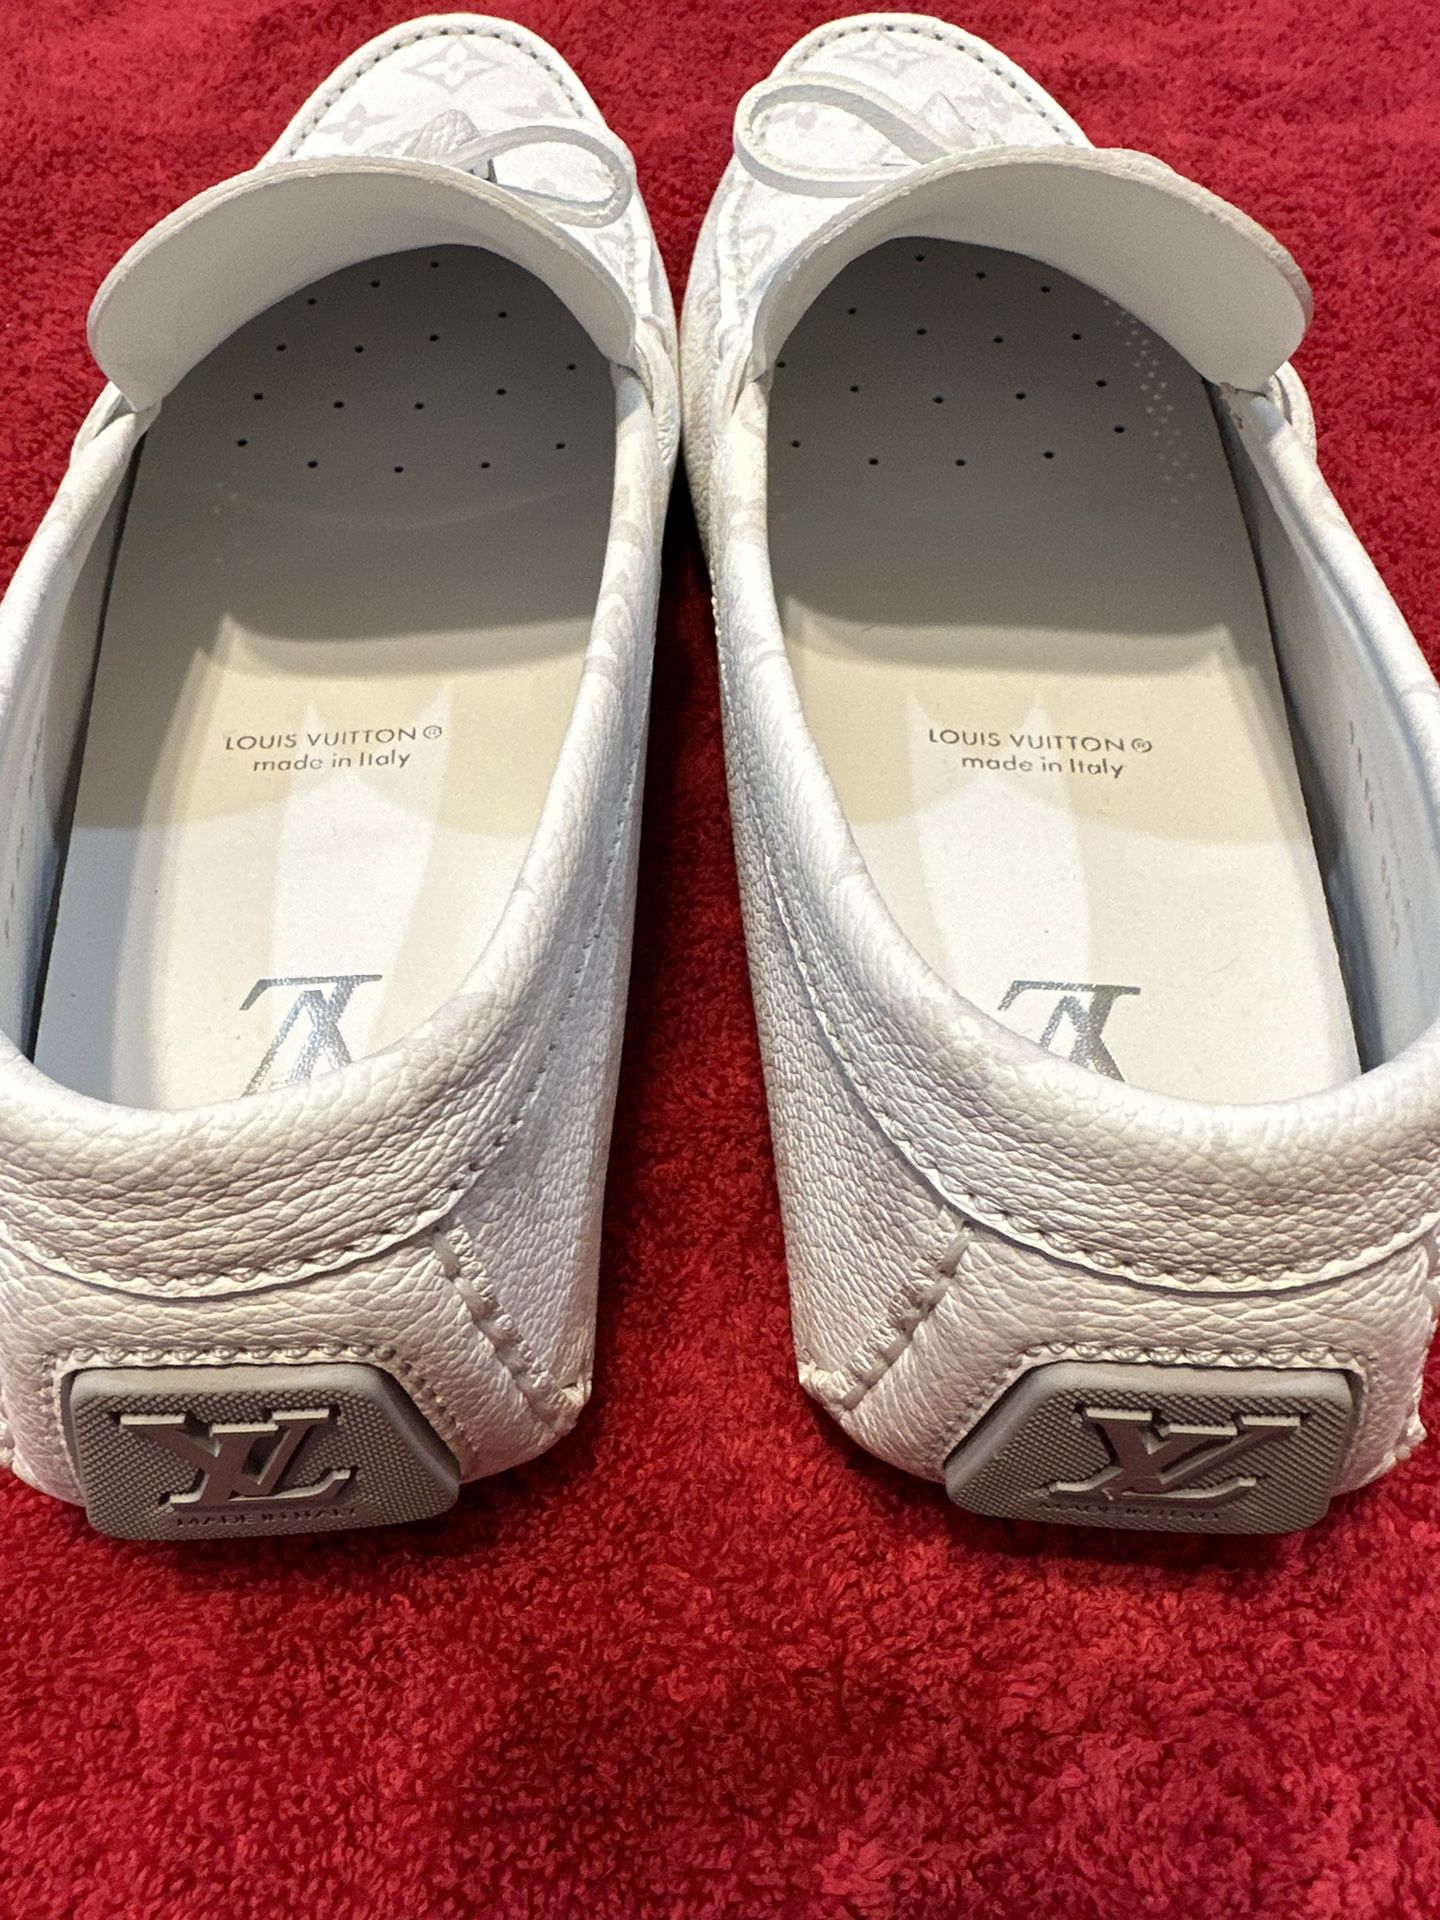 Louis Vuitton White Loafers for Sale in Boca Raton, FL - OfferUp